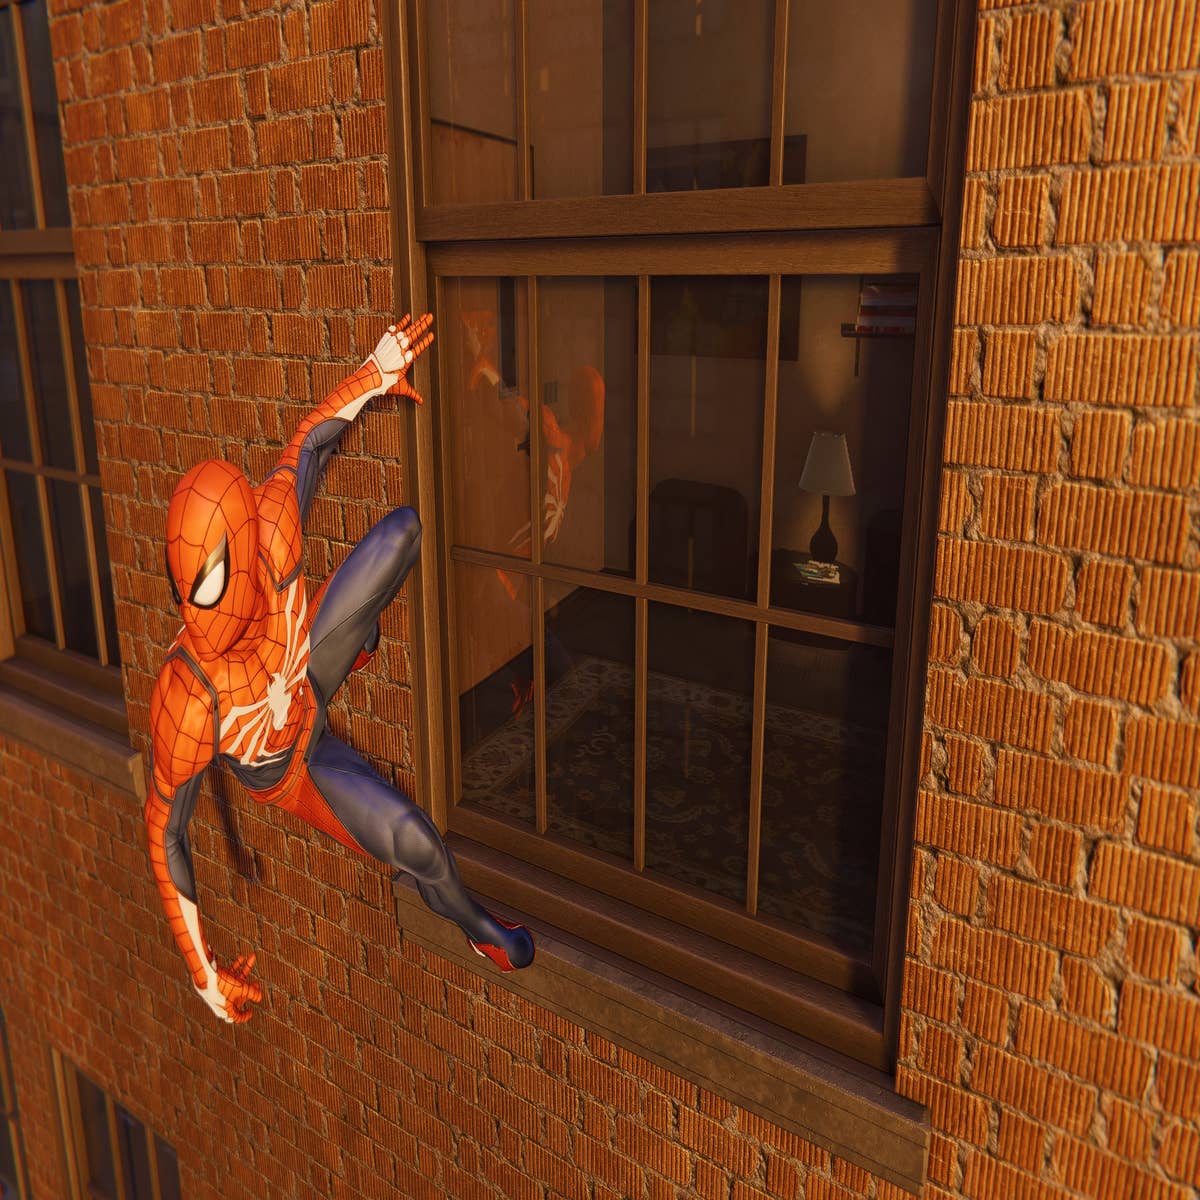 Marvel's Spider-Man Remastered PC Is a Solid Debut for Nixxes